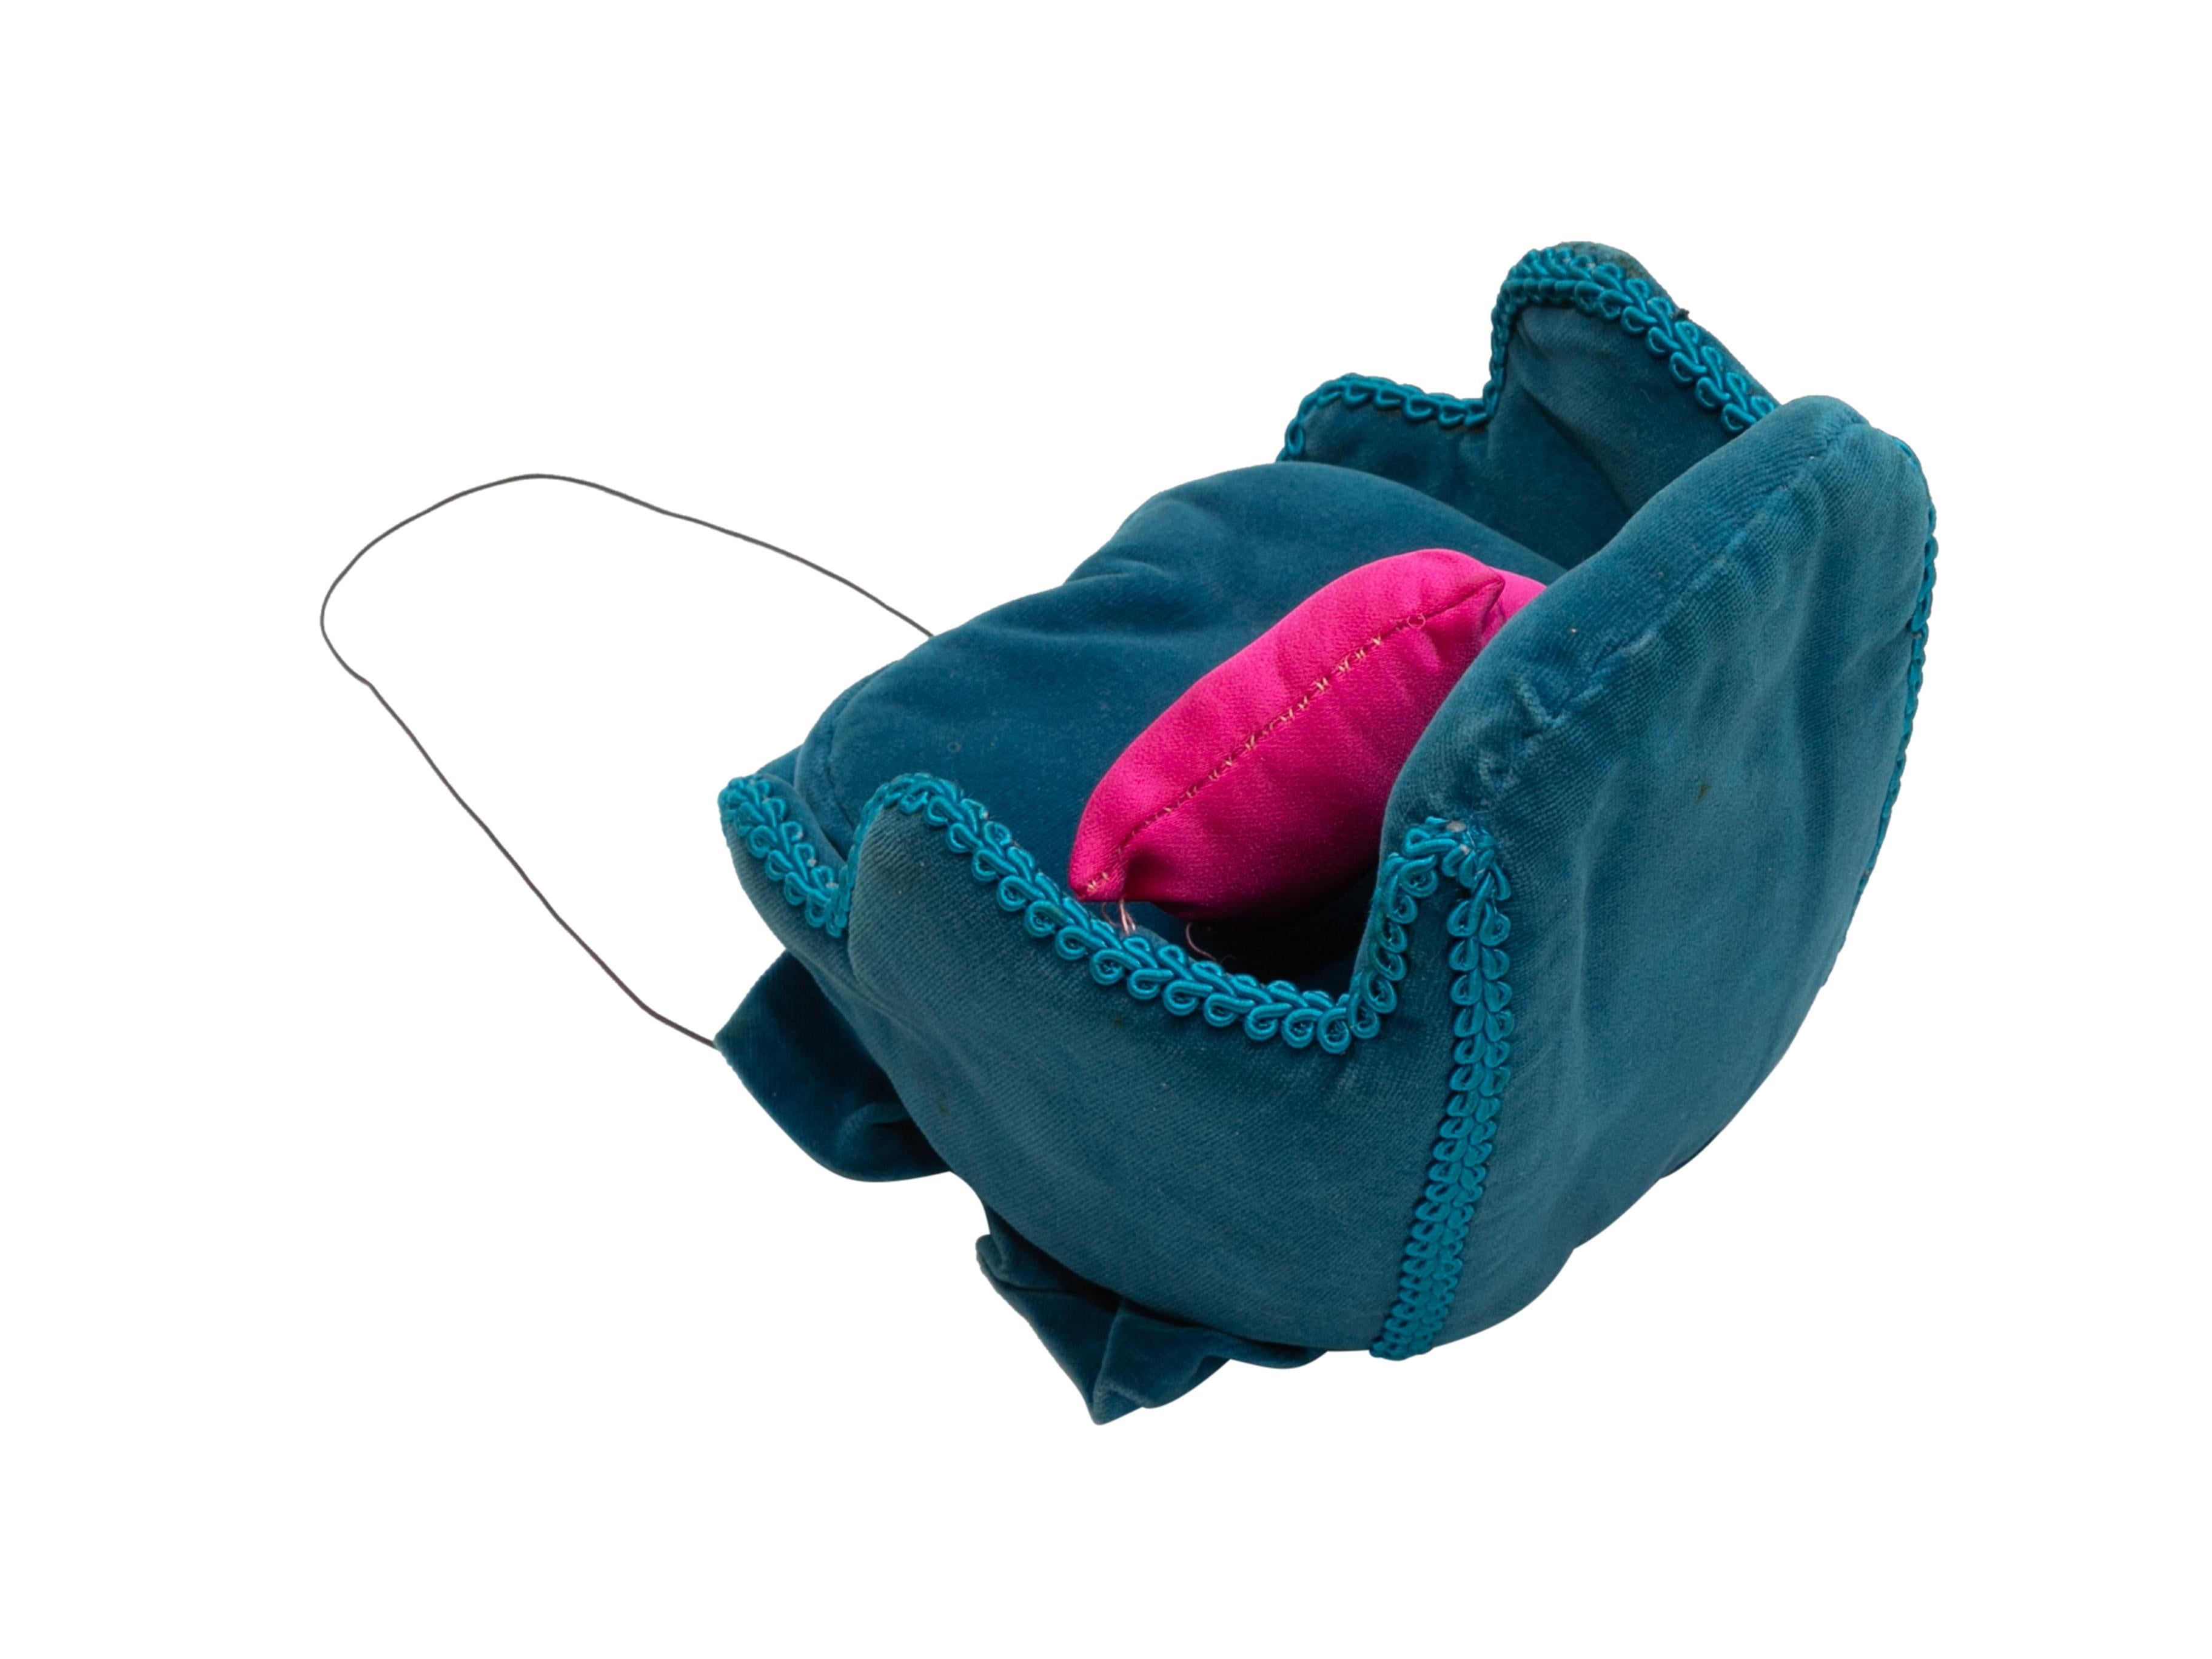 Vintage teal and fuchsia velvet chair-shaped hat by Karl Lagerfeld. Circa 1985. 8